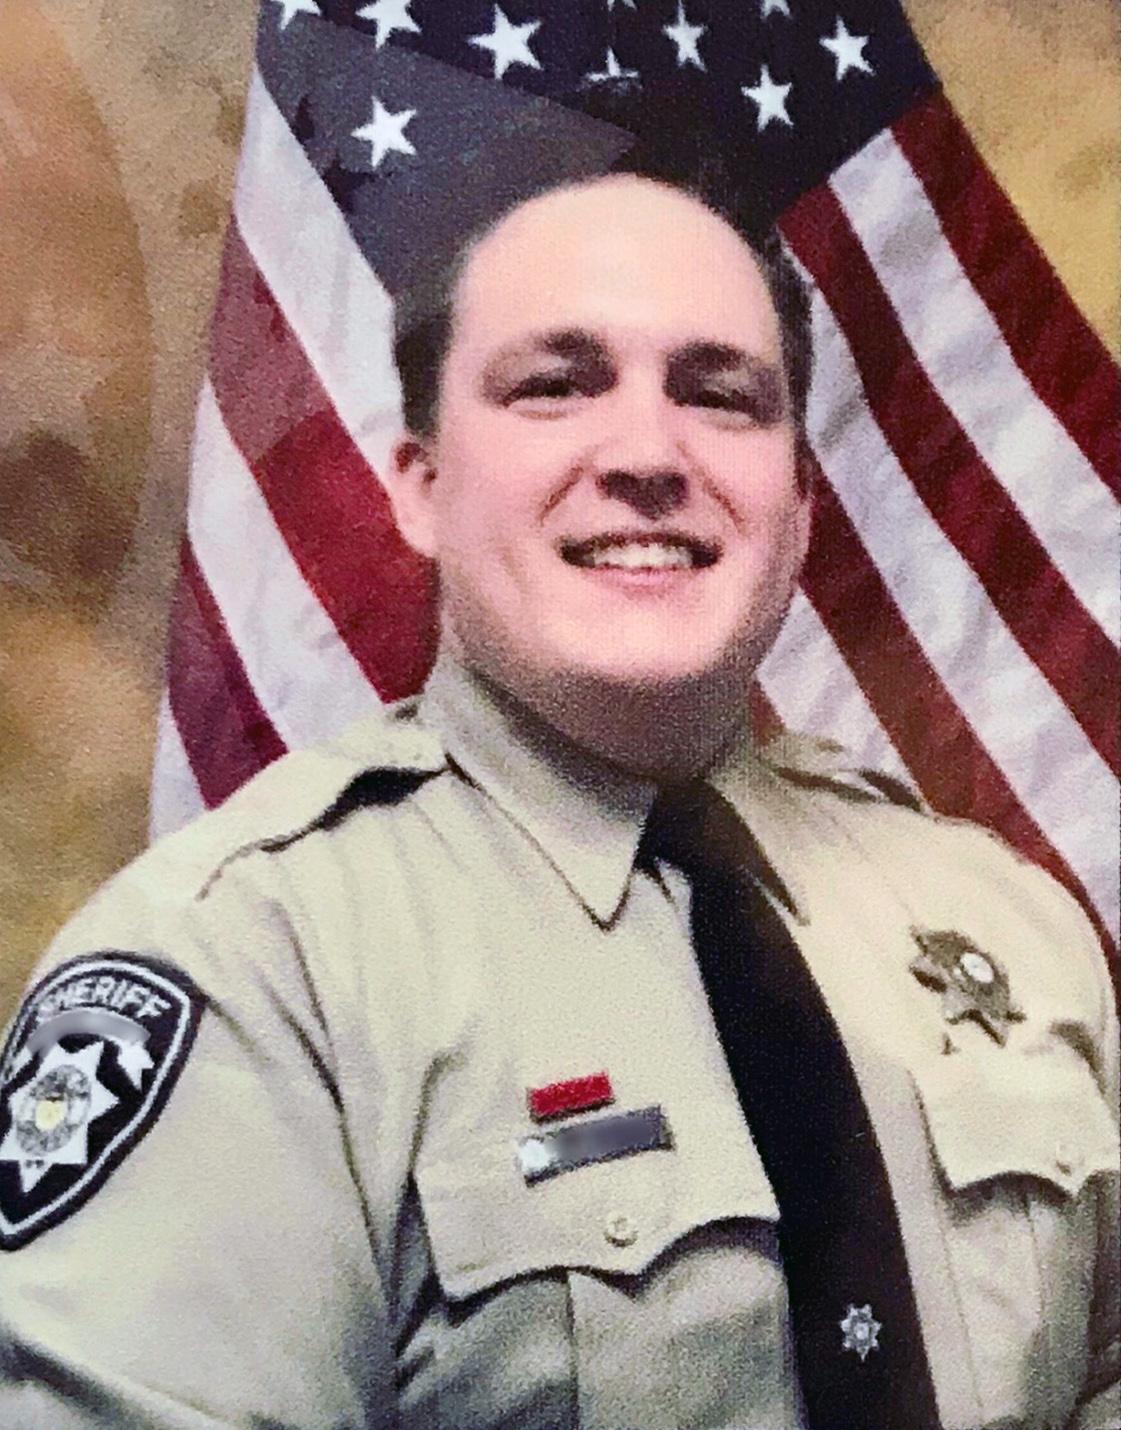 Ronald McAbee was a deputy for the Williamson County Sheriff's Office in Tennessee when he went to the U.S. Capitol on Jan. 6, 2021. (Courtesy of Sarah McAbee)